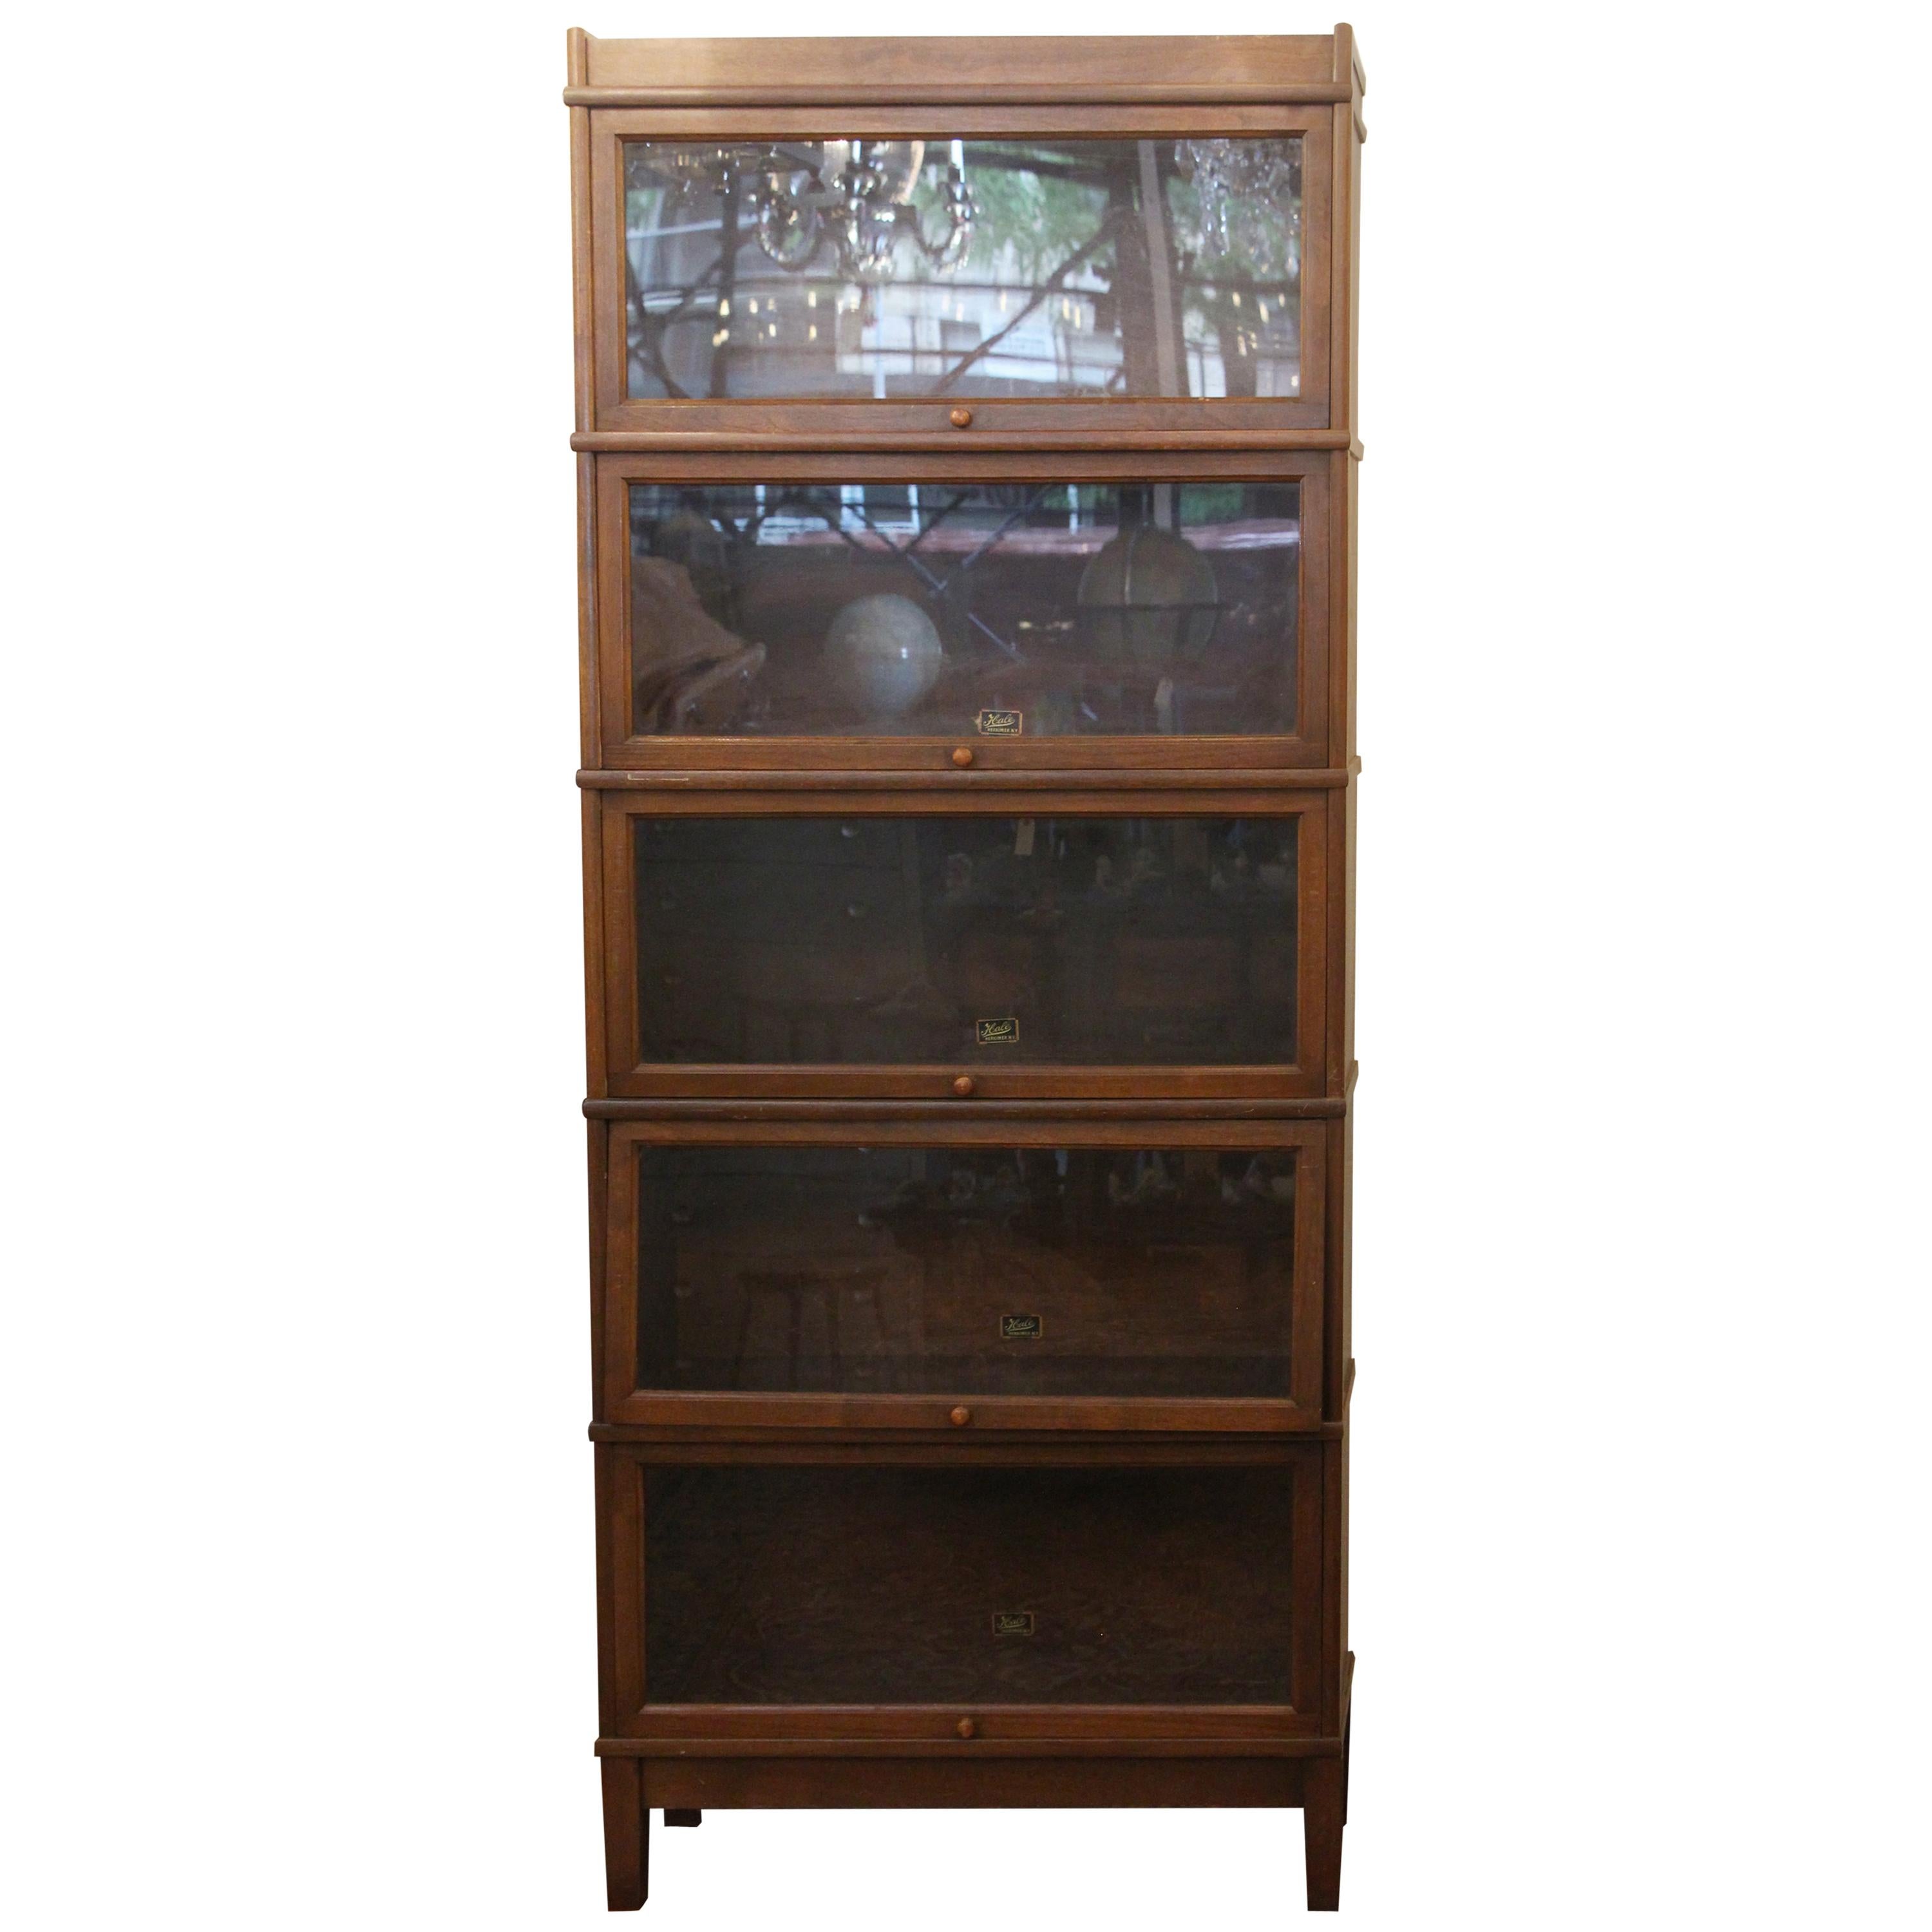 1920s Dark Wood Tone Five-Section Barrister Bookcase with Pull Out Glass Doors